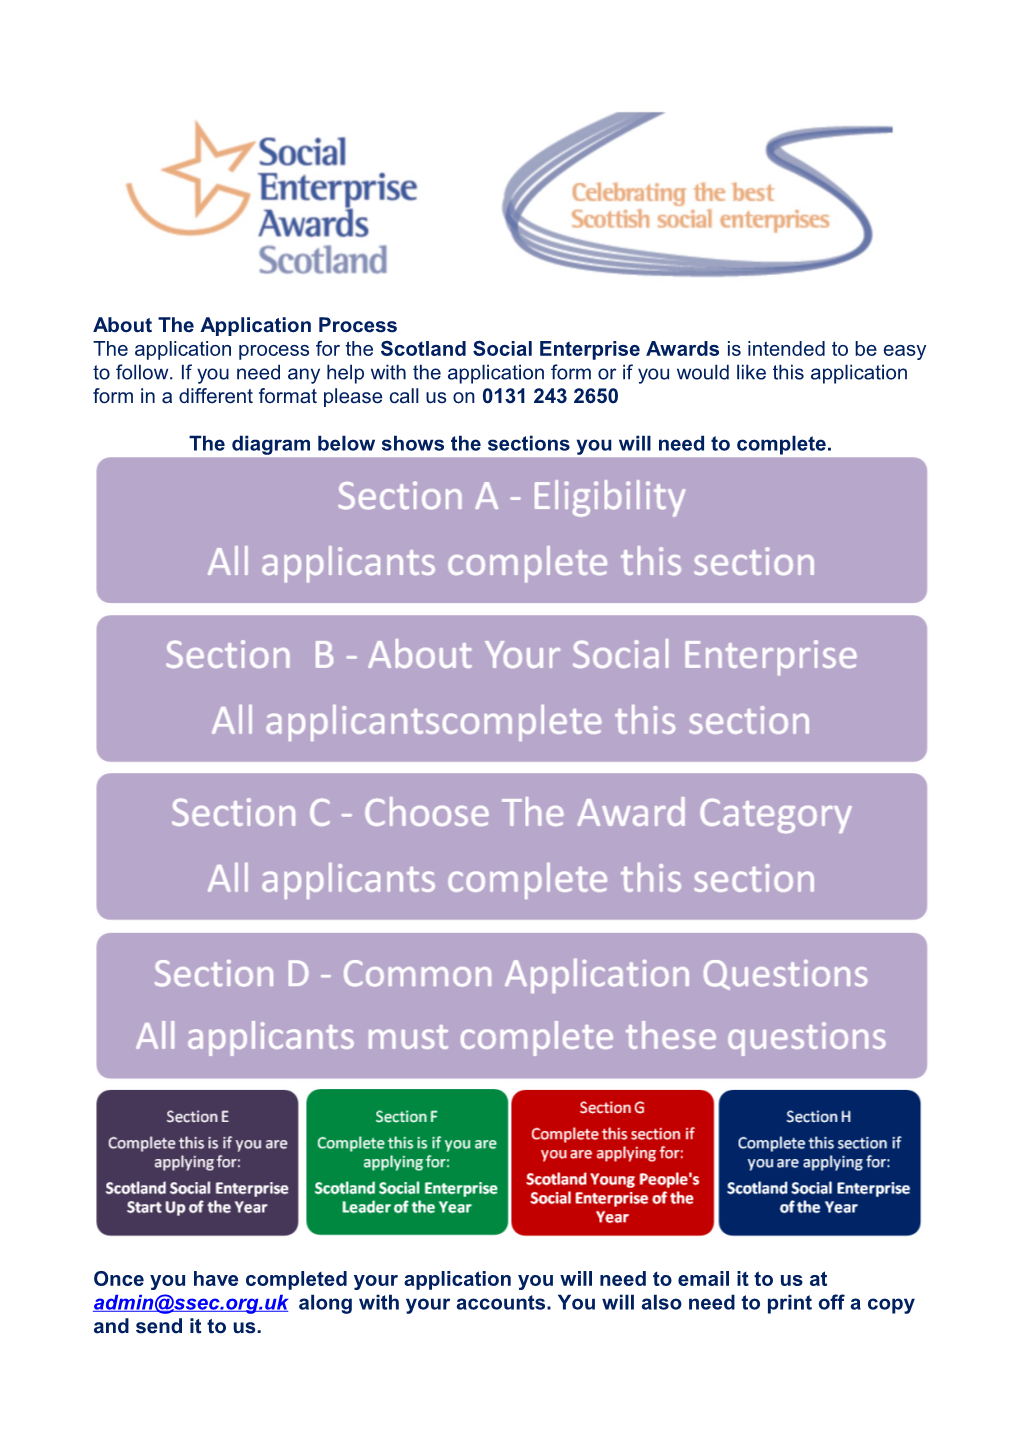 About the Application Process